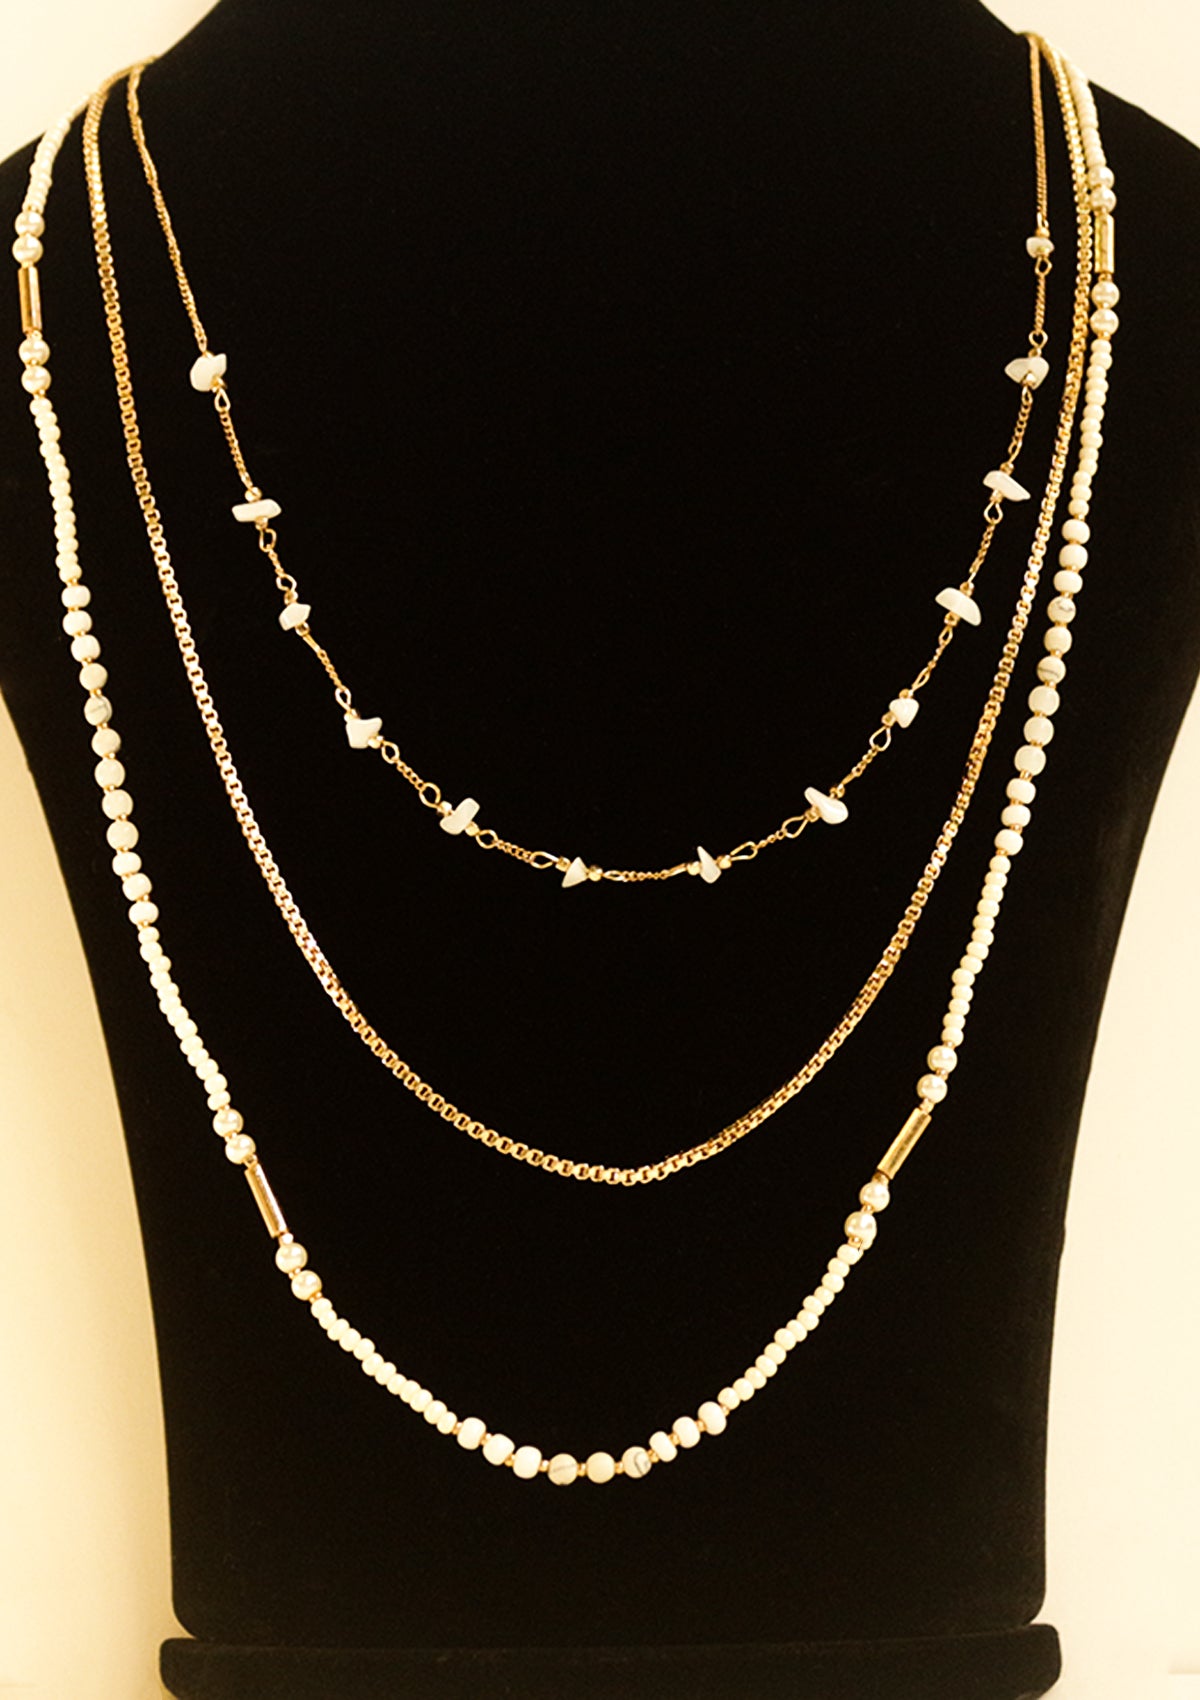 Beaded multilayered necklace